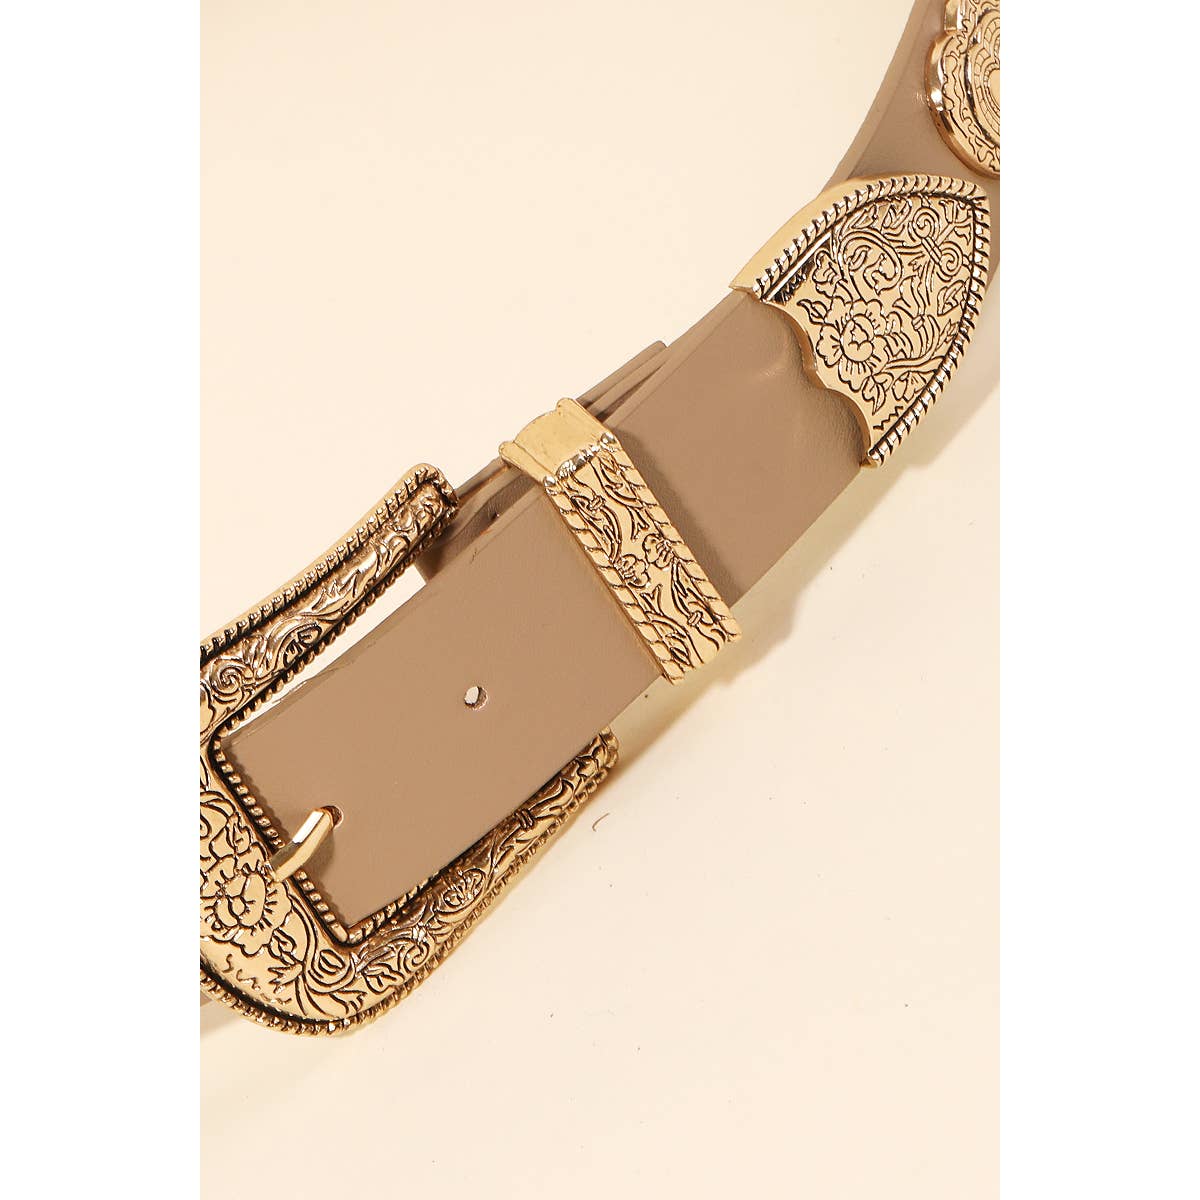 Etched Flower Heart Faux Leather Belt